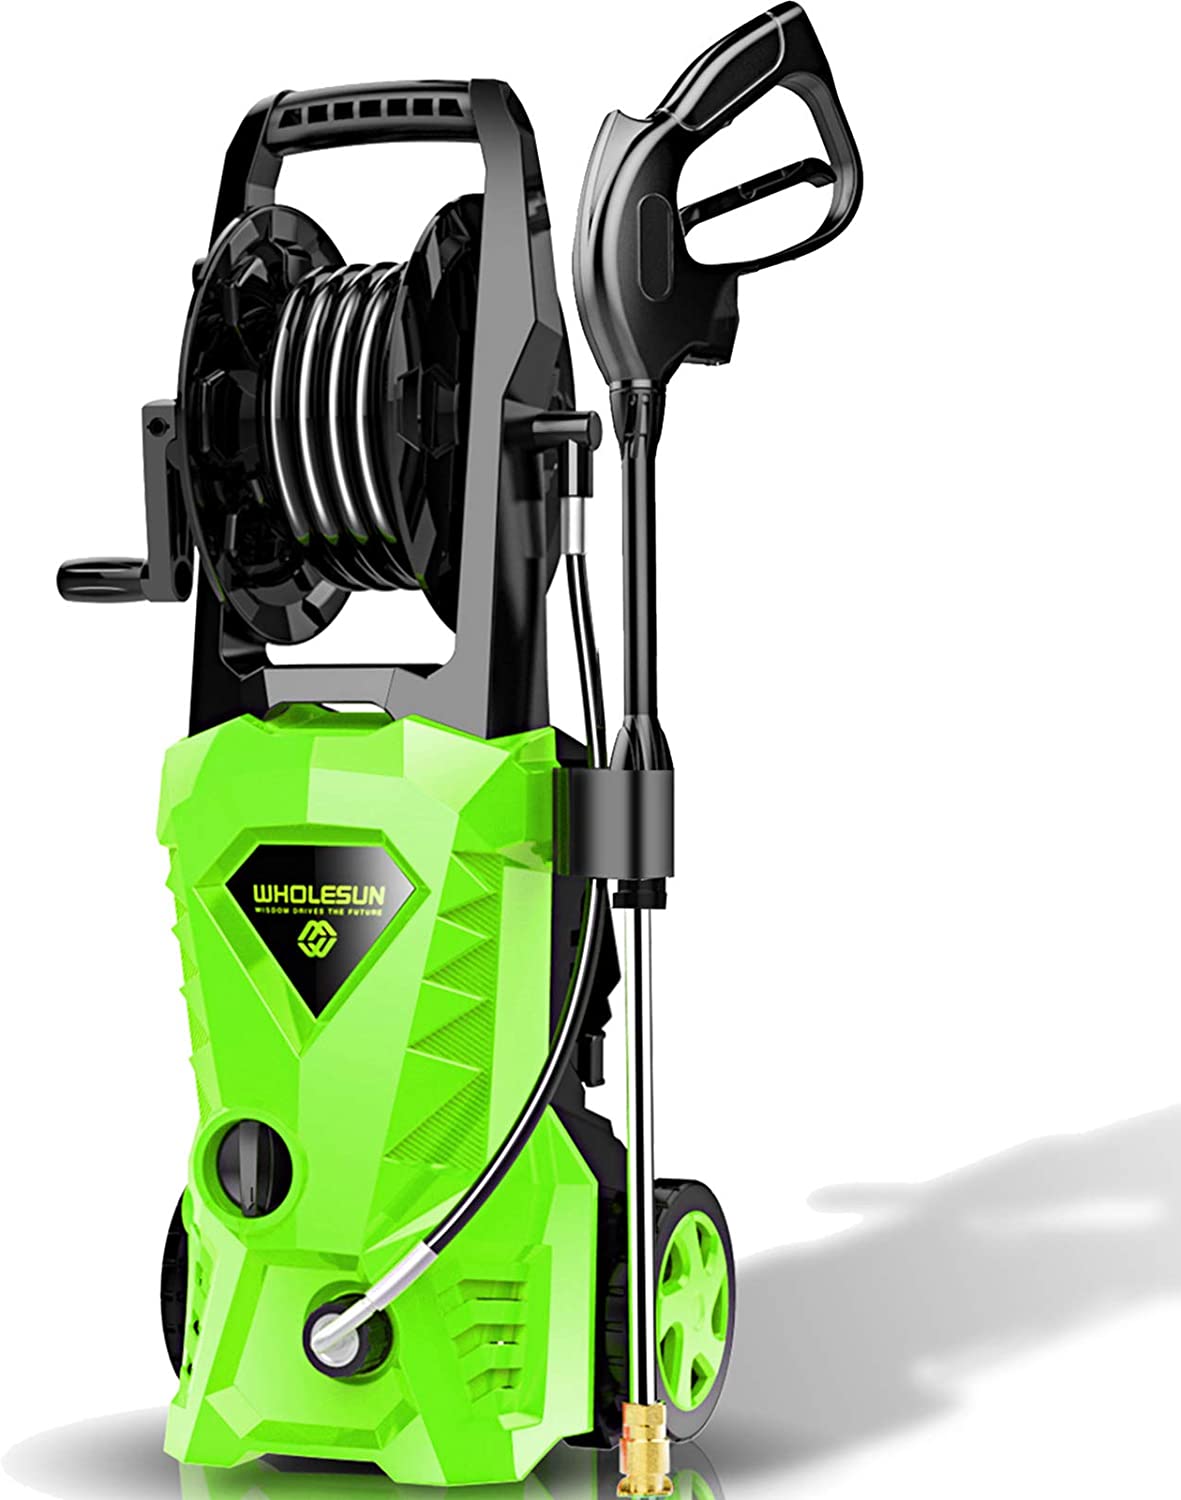 WHOLESUN WS 3000 Electric Pressure Washer 1.58GPM Power Washer 1600W High Pressure Cleaner Machine with 4 Nozzles Foam Cannon for Cars, Homes, Driveways, Patios (Green)